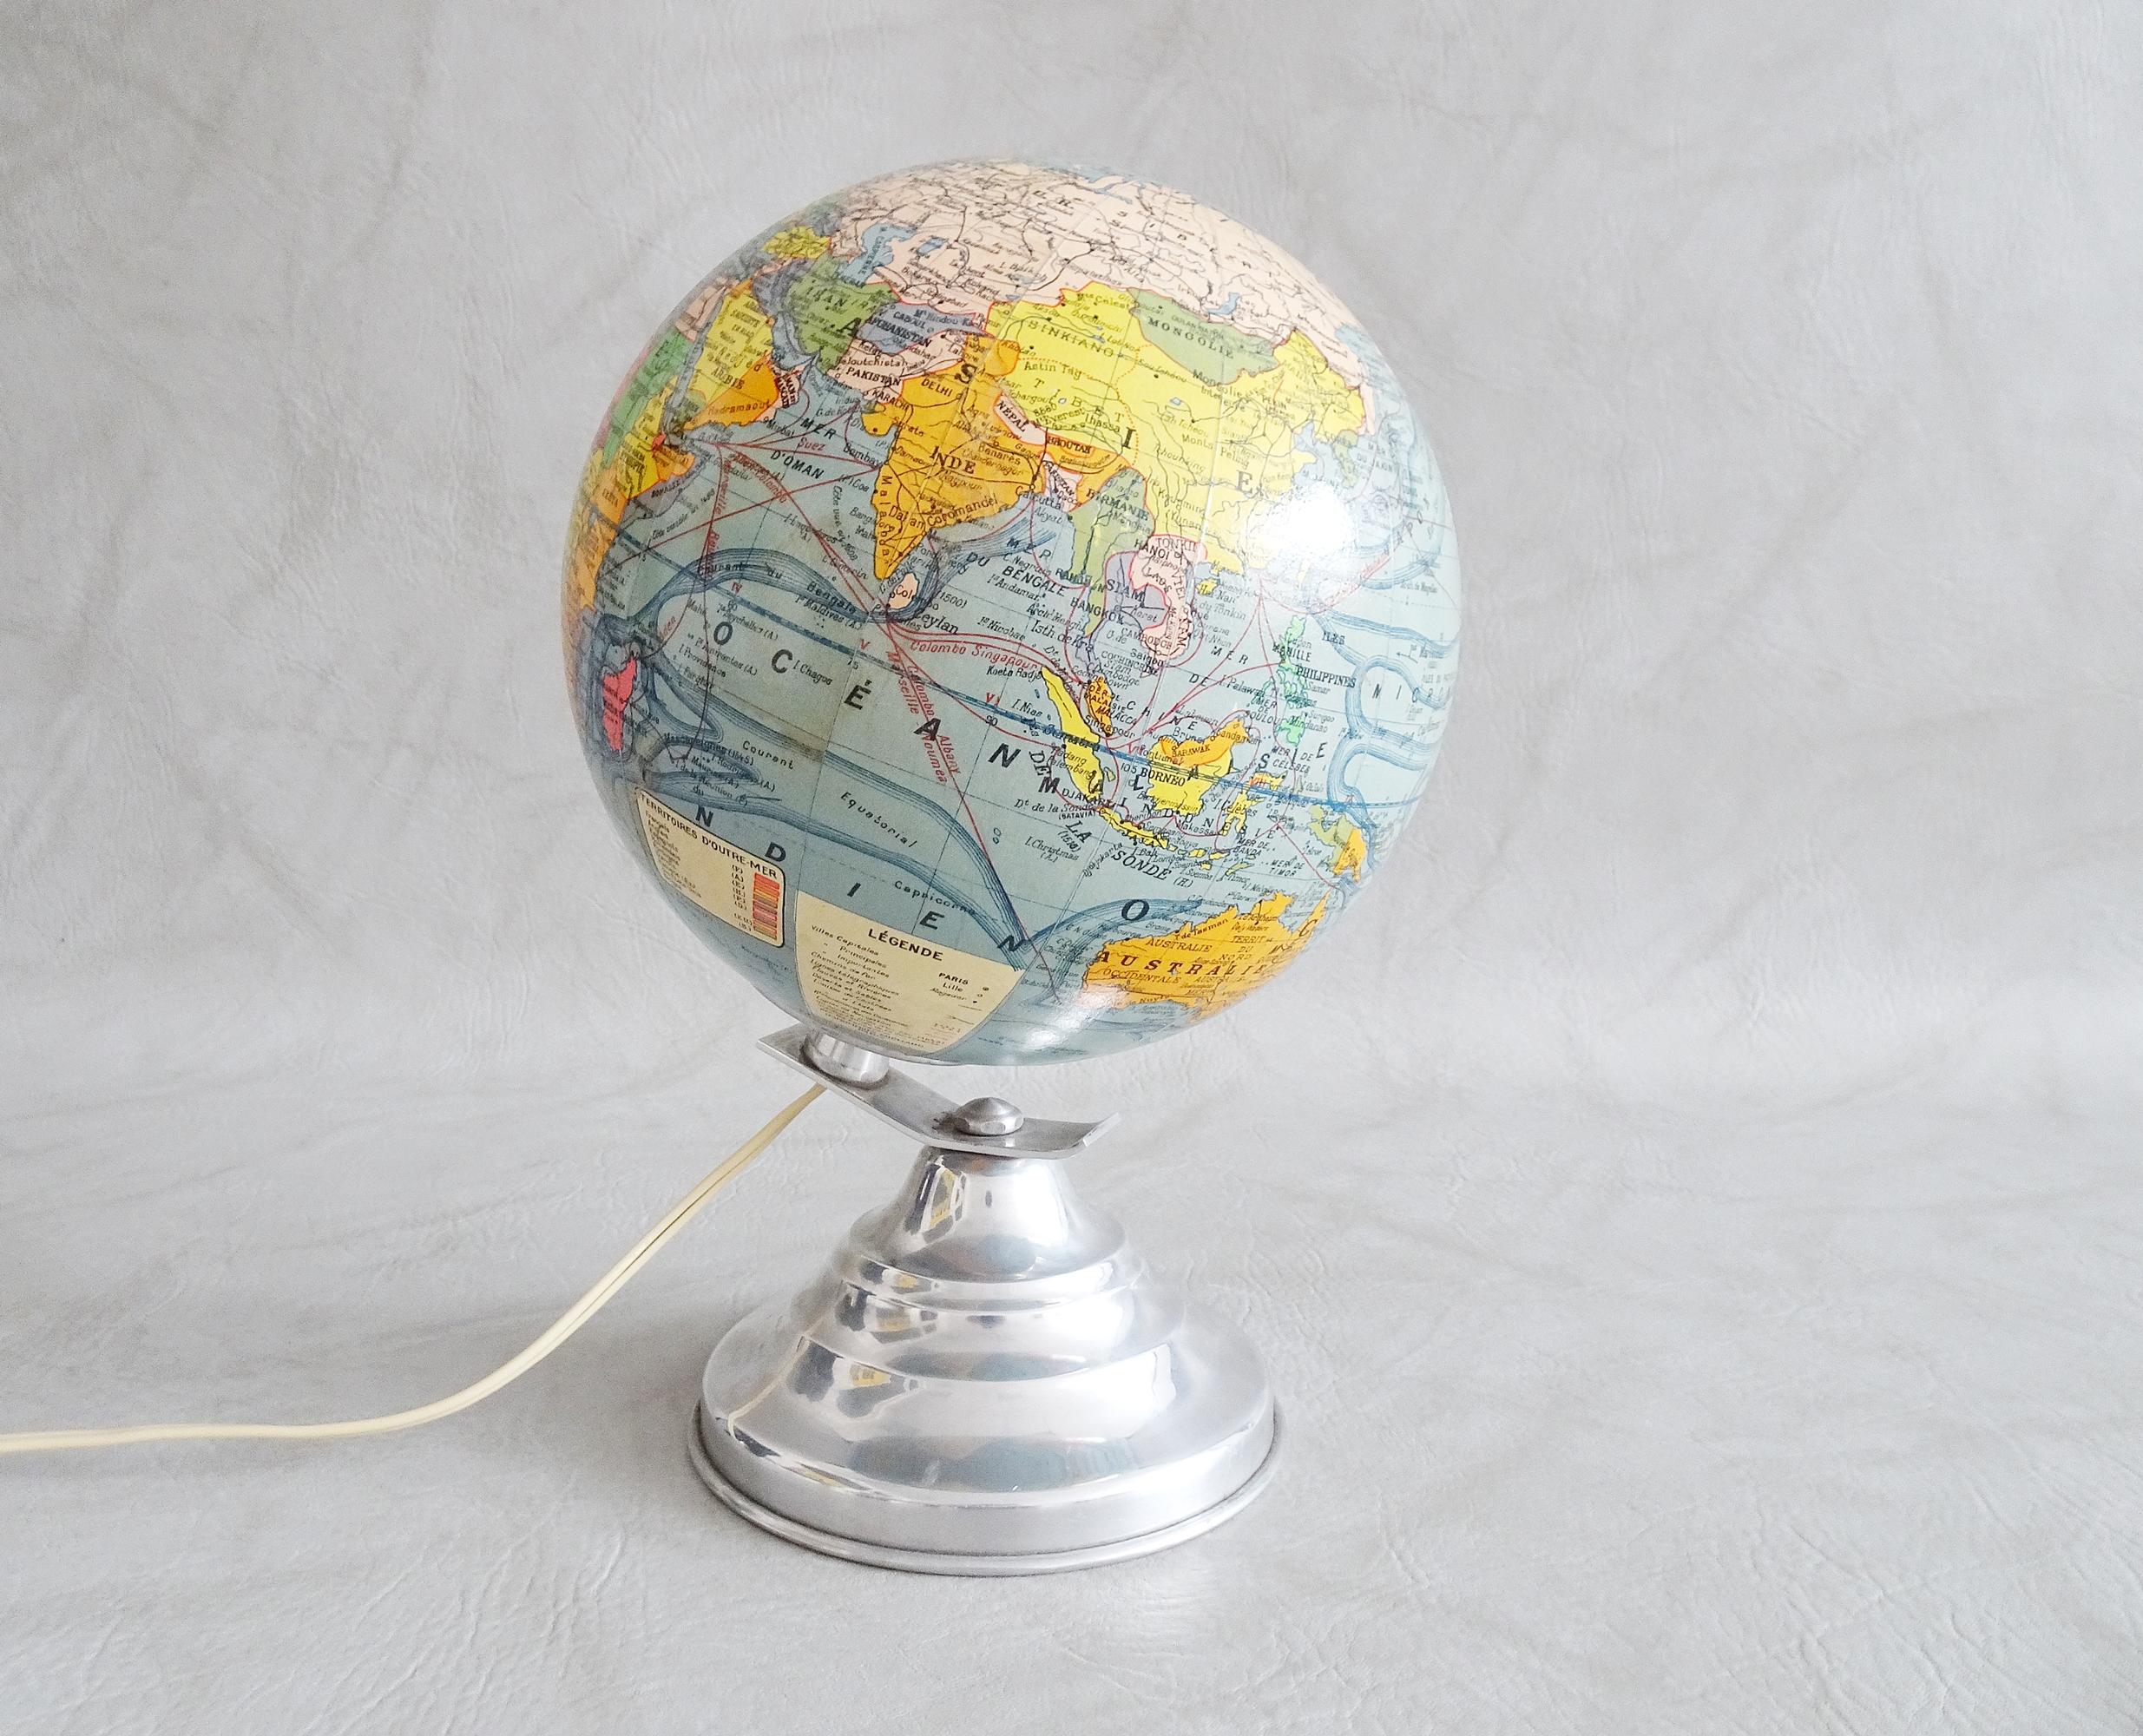 French Art Deco Illuminated Terrestrial Globe by Barrère & Thomas, France 1940s For Sale